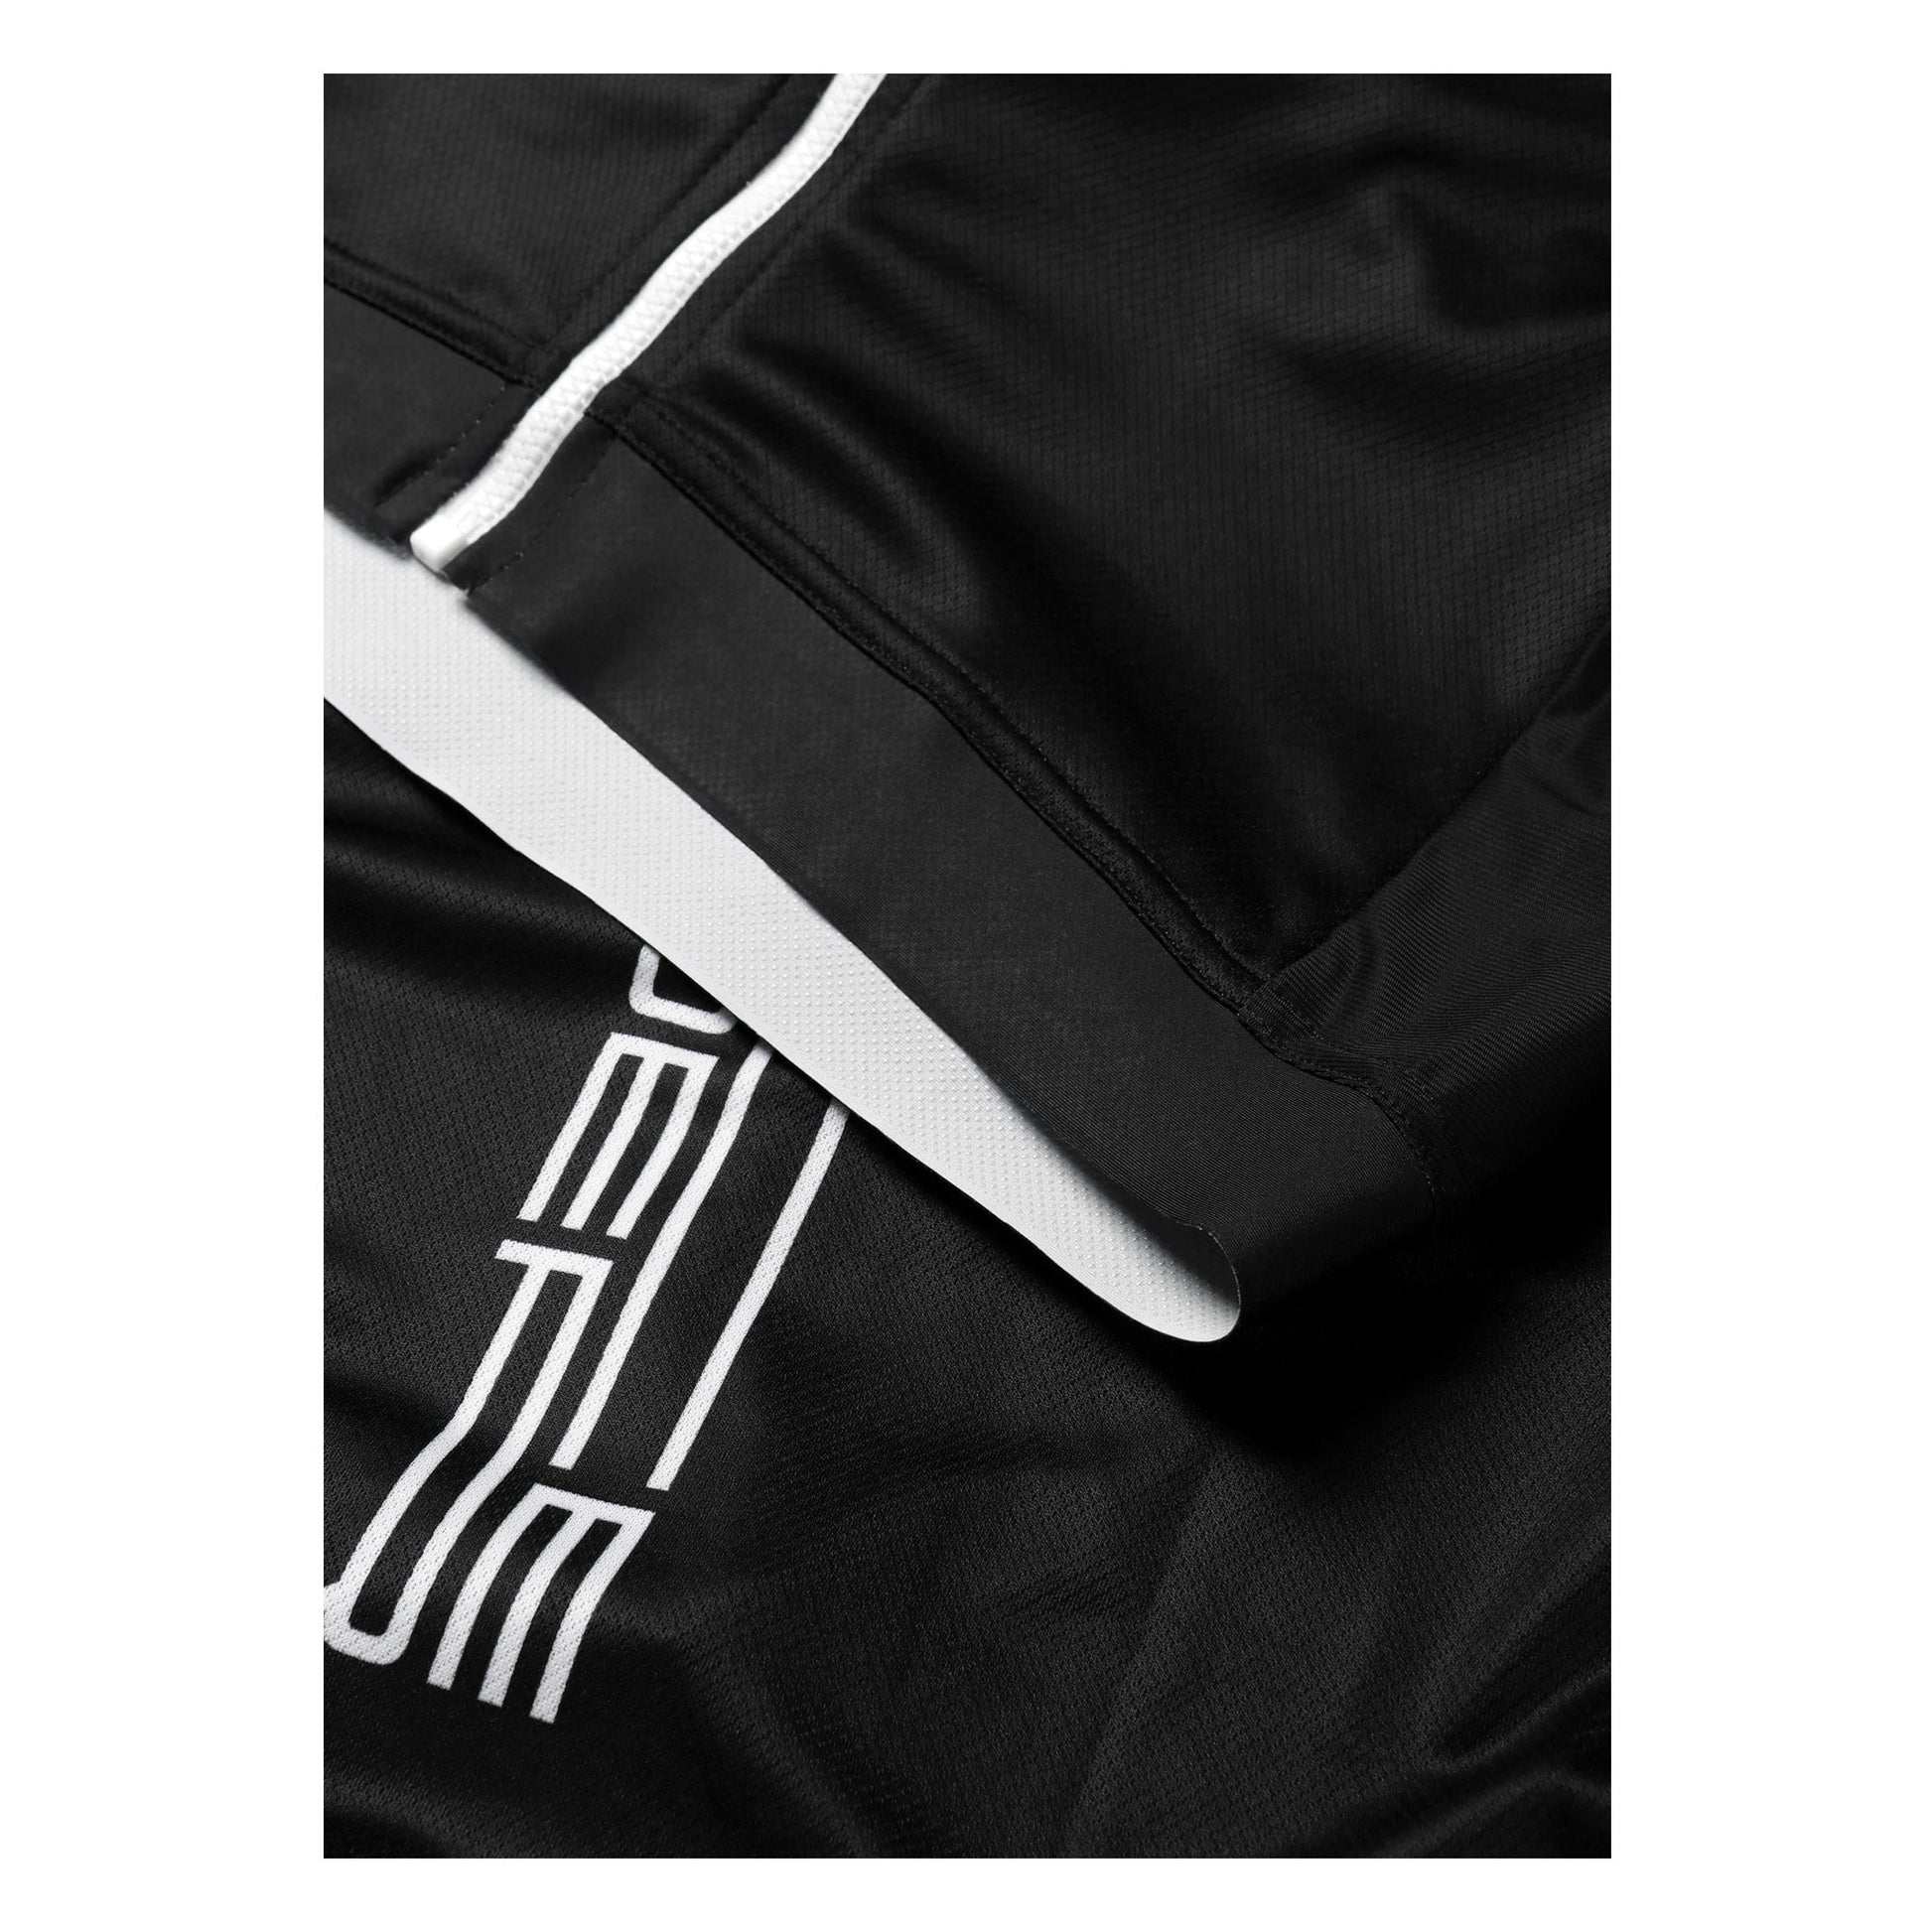 Supernova Sustainable Short Sleeves Cycling Jersey Black from Ascender Cycling Club Zürich Switzerland Silicon Injected Waist Power Band View